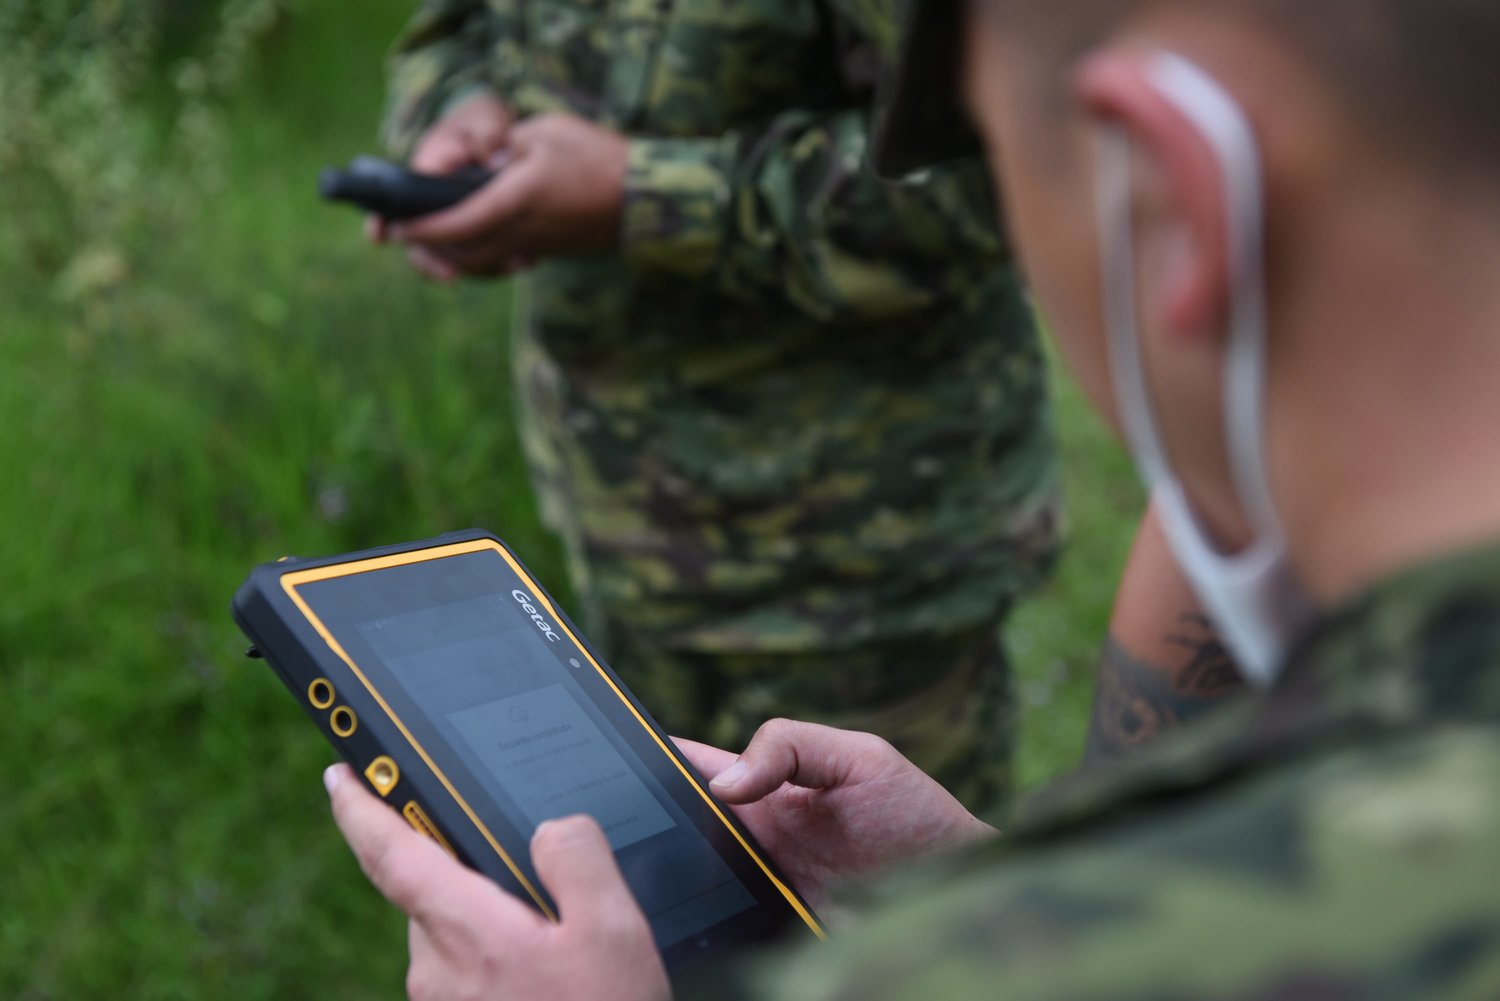 Solider using mine detection technology